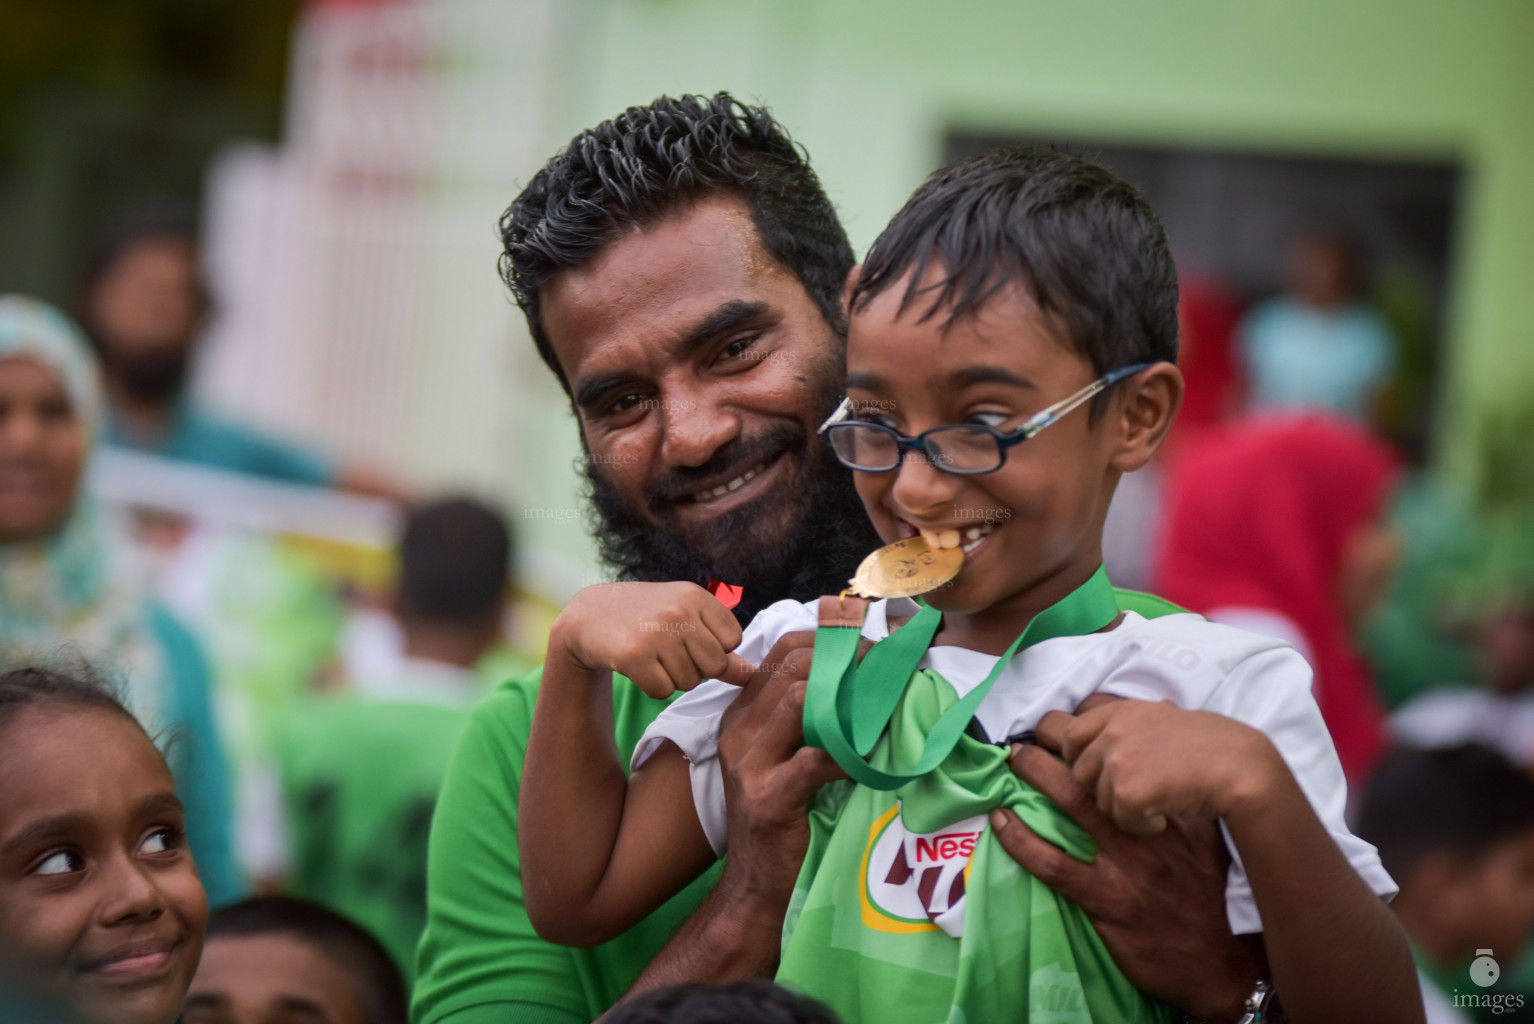 Finals and Closing ceremony of MILO Kids Football Fiesta 2019 in Henveiru Grounds in Male', Maldives, Saturday, February 23rd 2019 (Images.mv Photo/Ismail Thoriq)